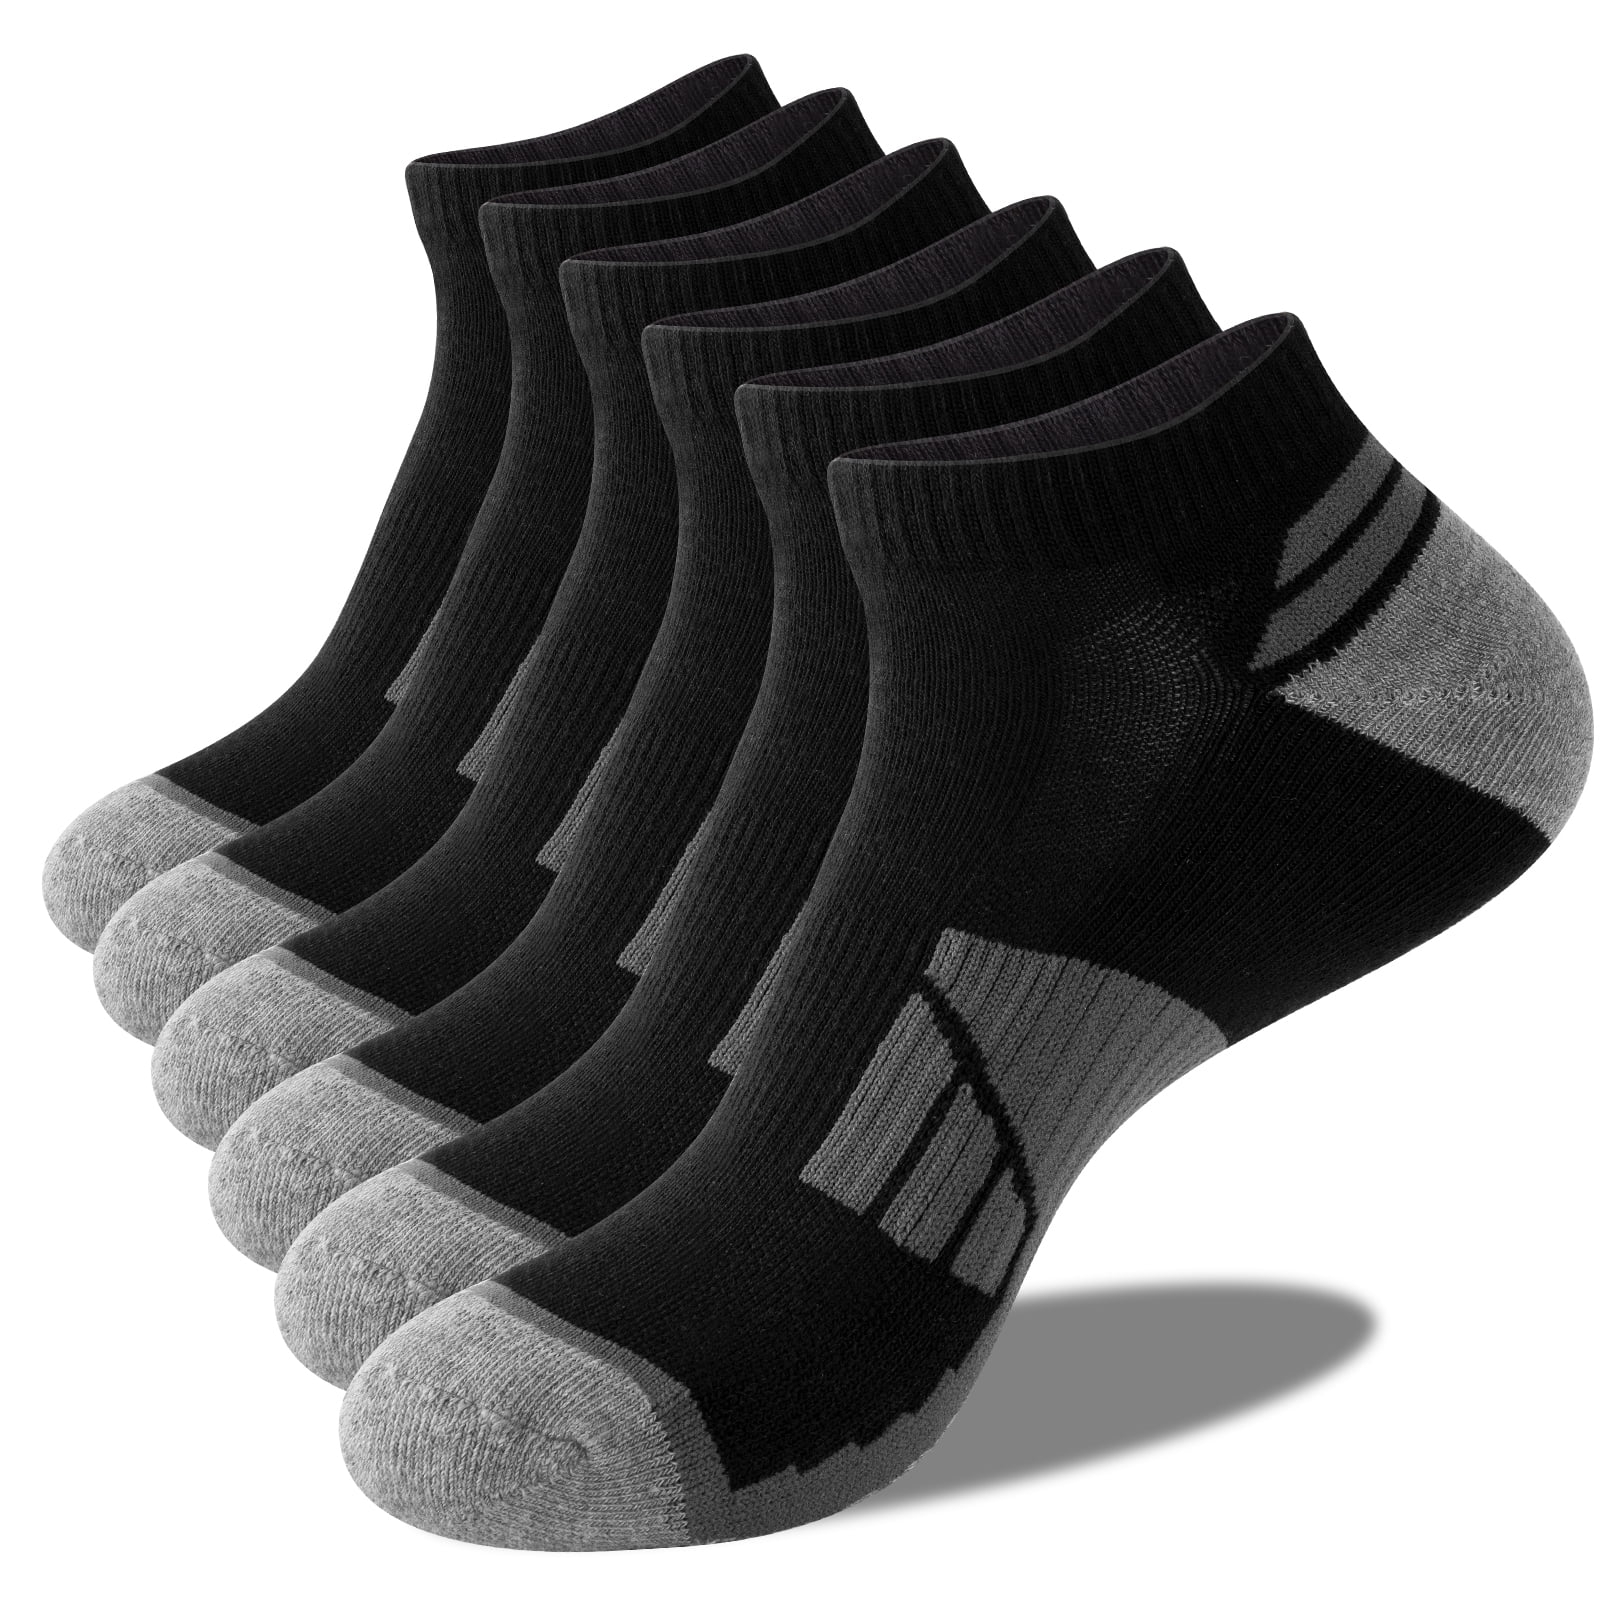 Grid 6 Pairs Mens Ankle Quarter Crew Athletic Work Sports Socks Cotton Size 9-13 